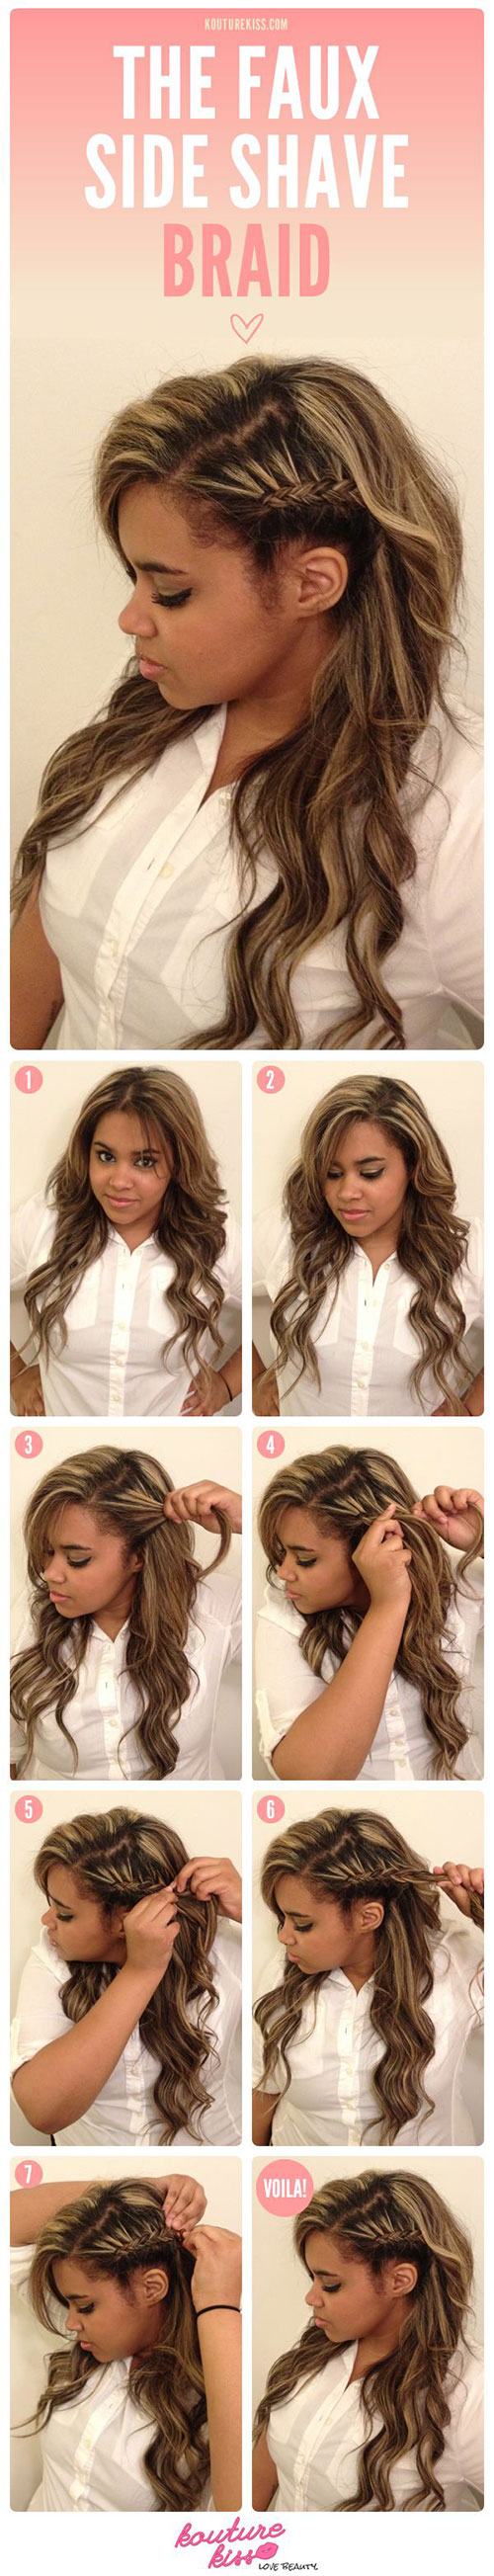 20 Easy Step By Step Summer Braids Style Tutorials For Beginners